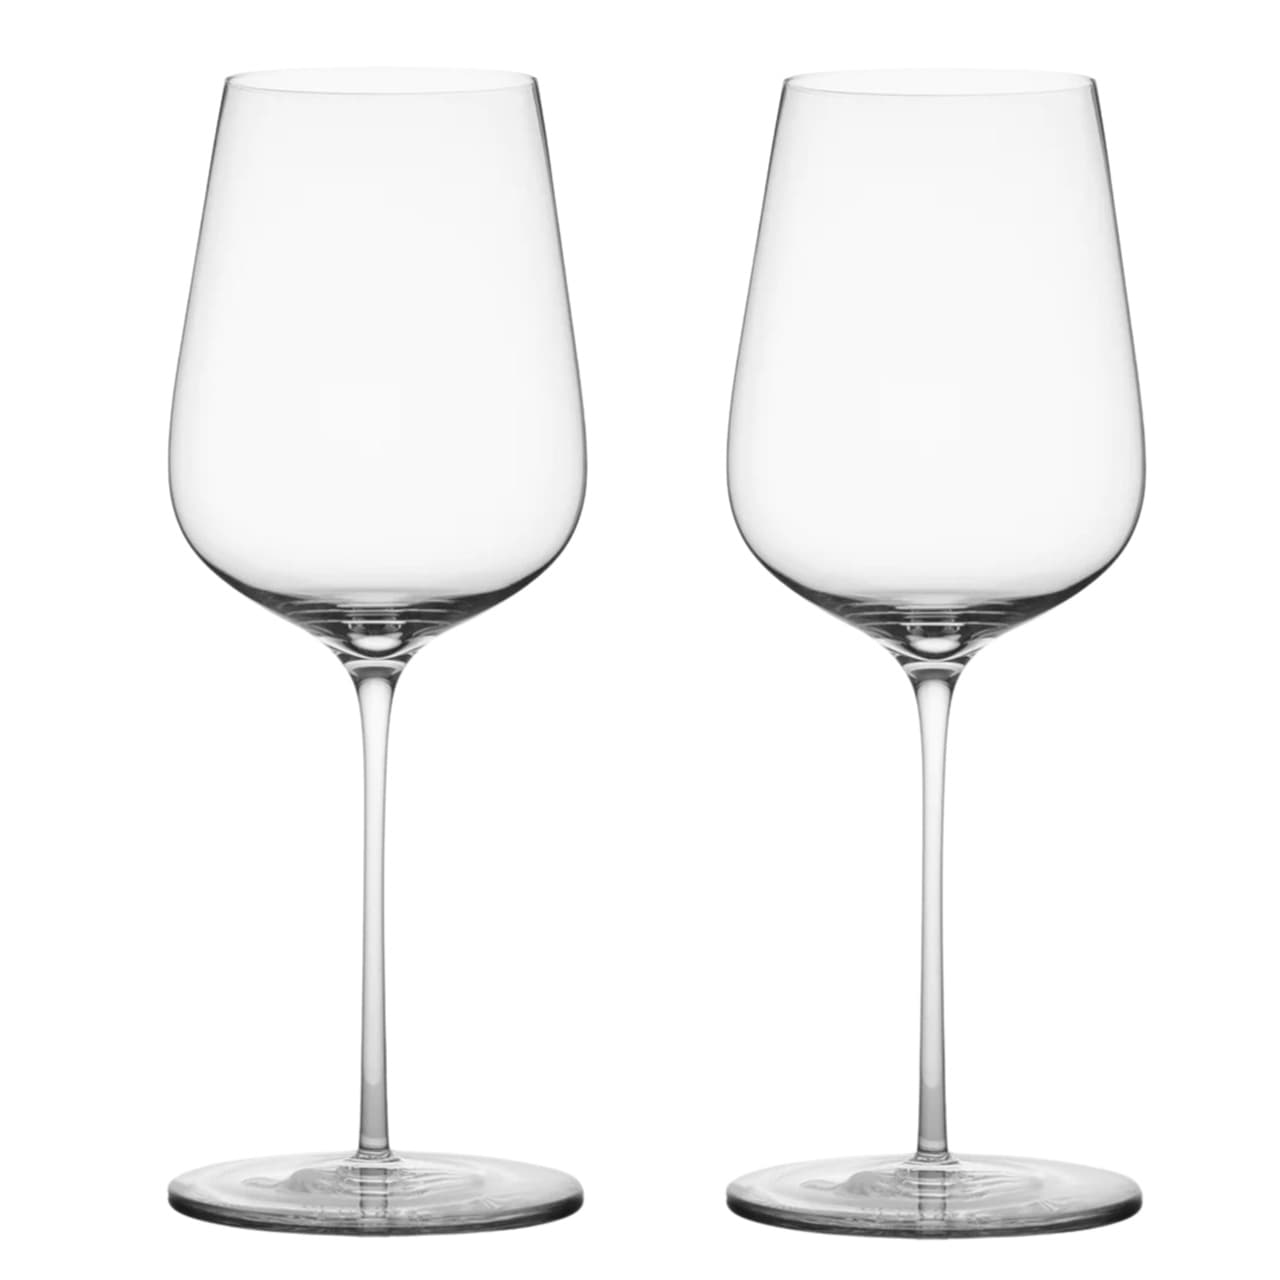 The 15 Best Wine Glasses According To Experts Buy Side From Wsj 7946